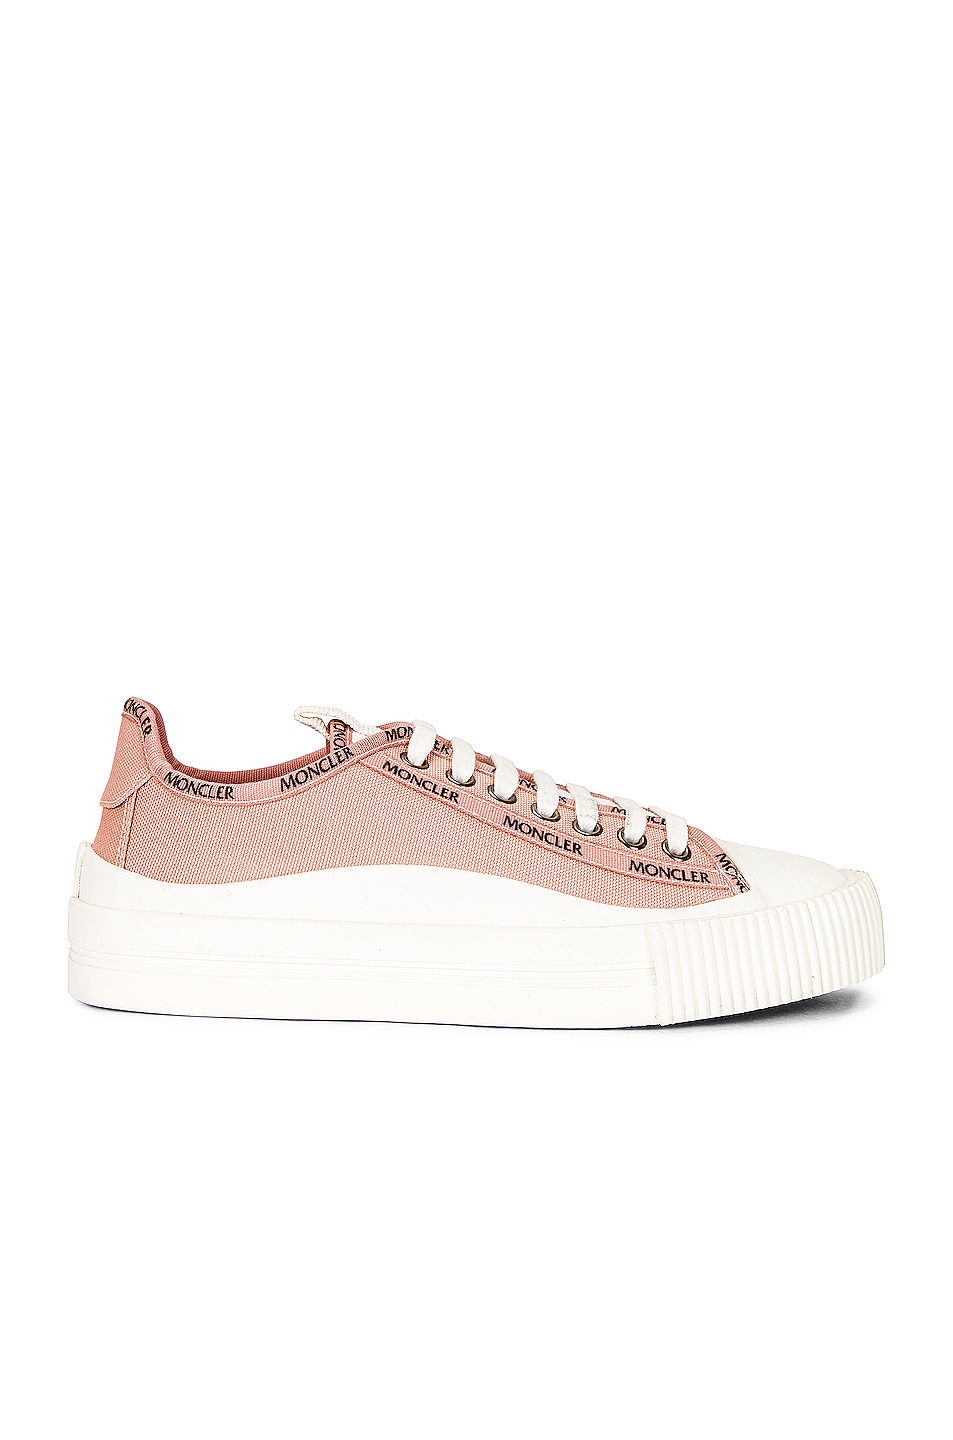 Image 1 of Moncler Glissiere Sneaker in Blush